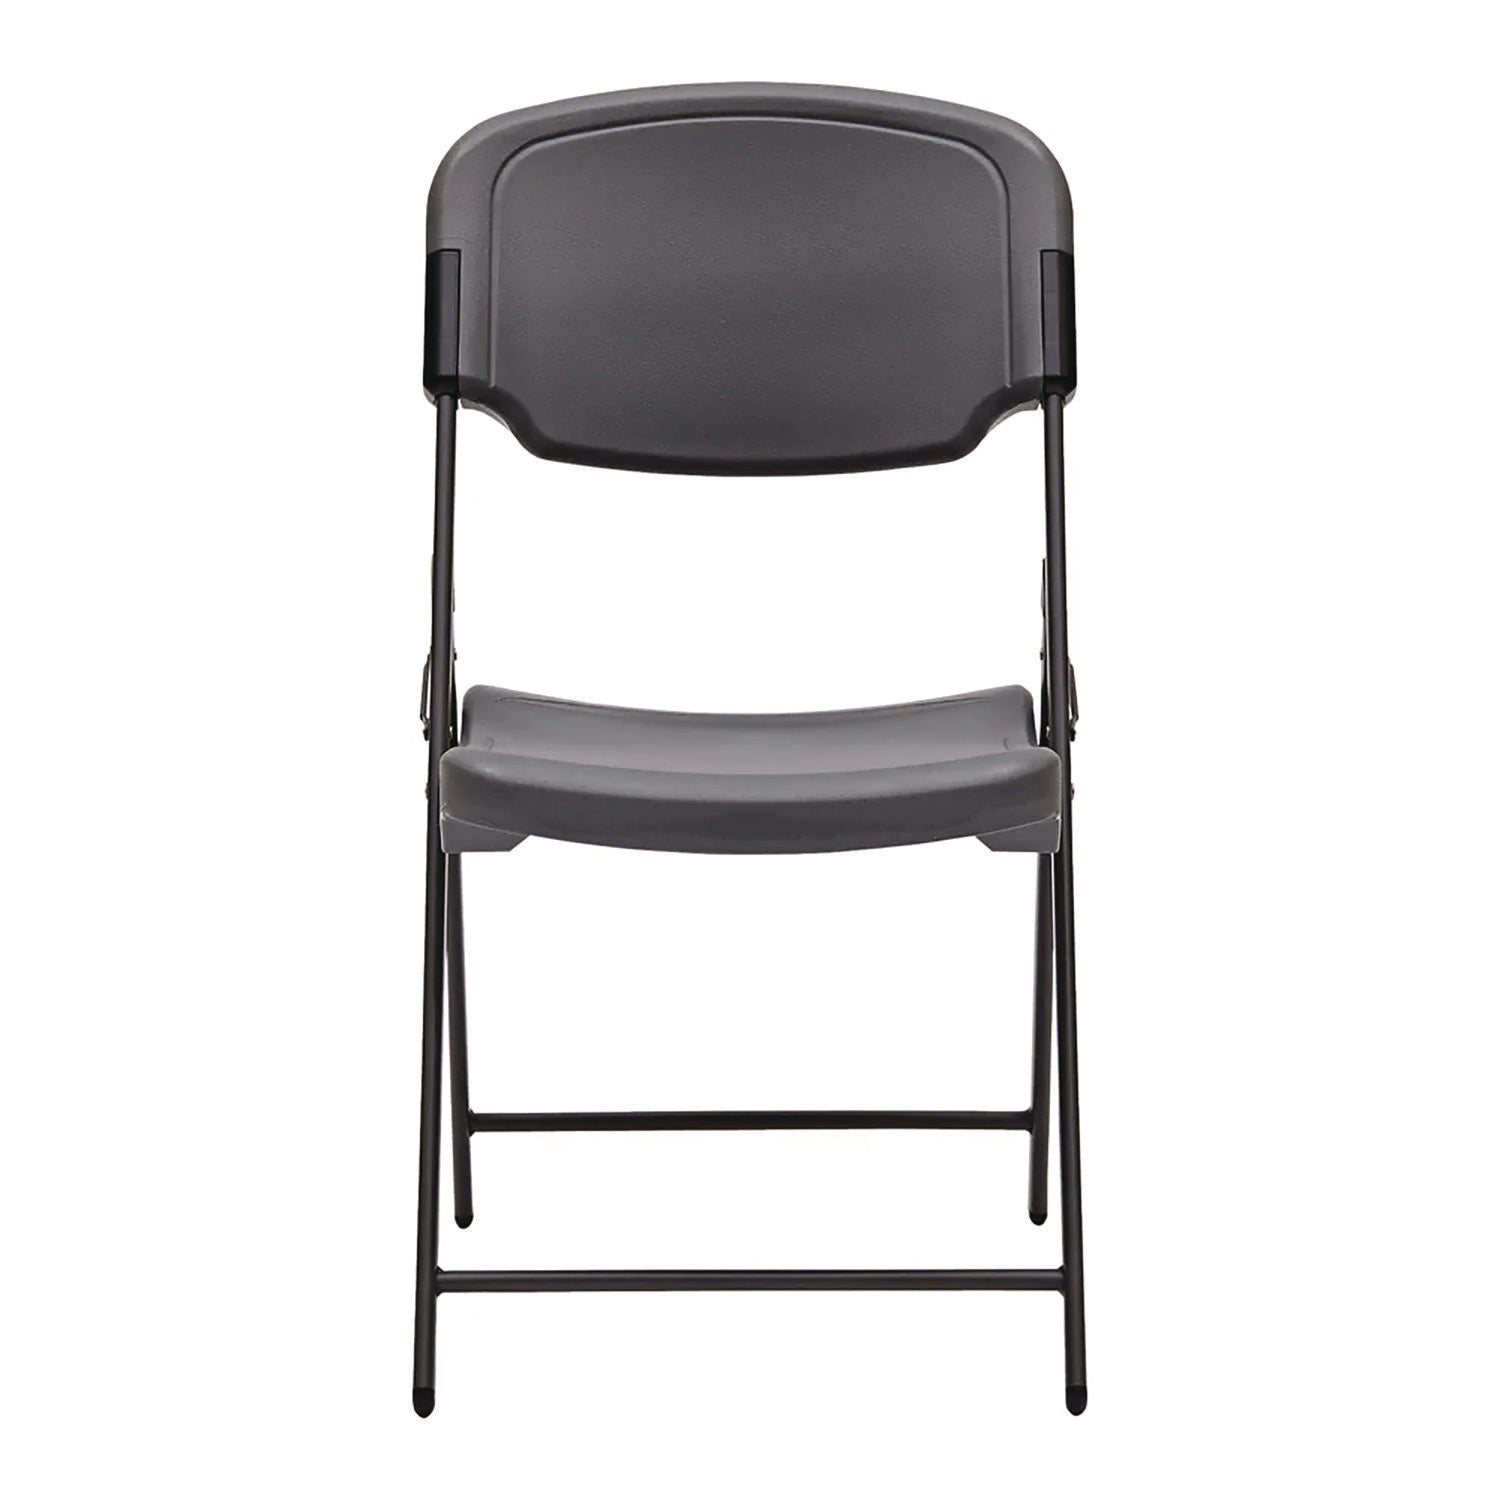 Rough n Ready Commercial Folding Chair, Supports Up to 350 lb, 15.25" Seat Height, Charcoal Seat, Charcoal Back, Silver Base - 2